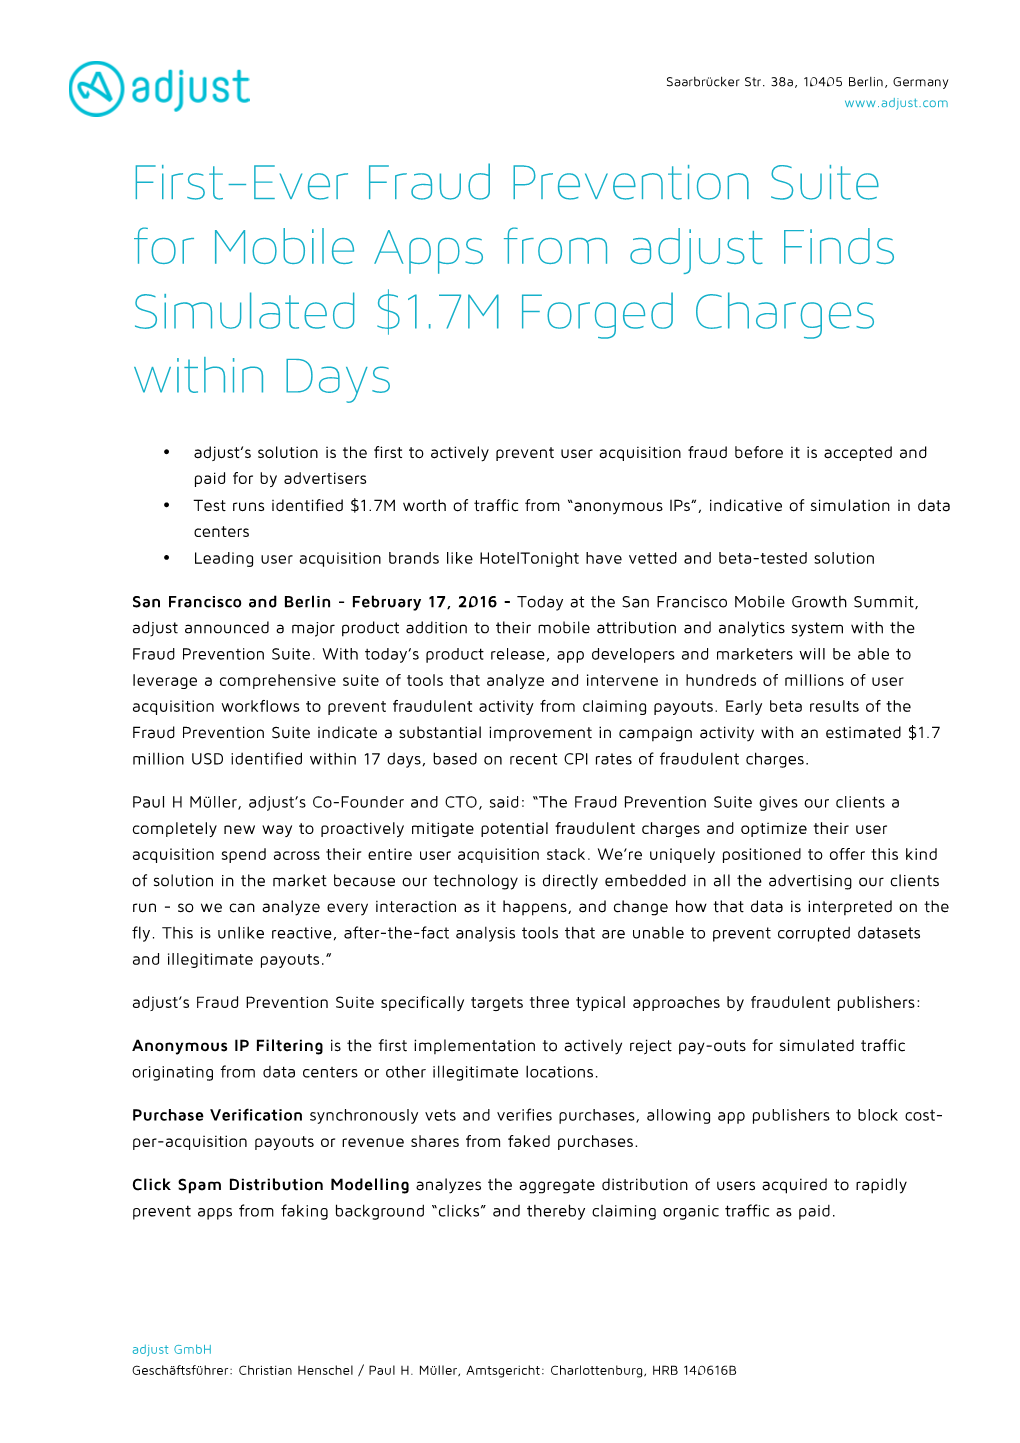 First-Ever Fraud Prevention Suite for Mobile Apps from Adjust Finds Simulated $1.7M Forged Charges Within Days